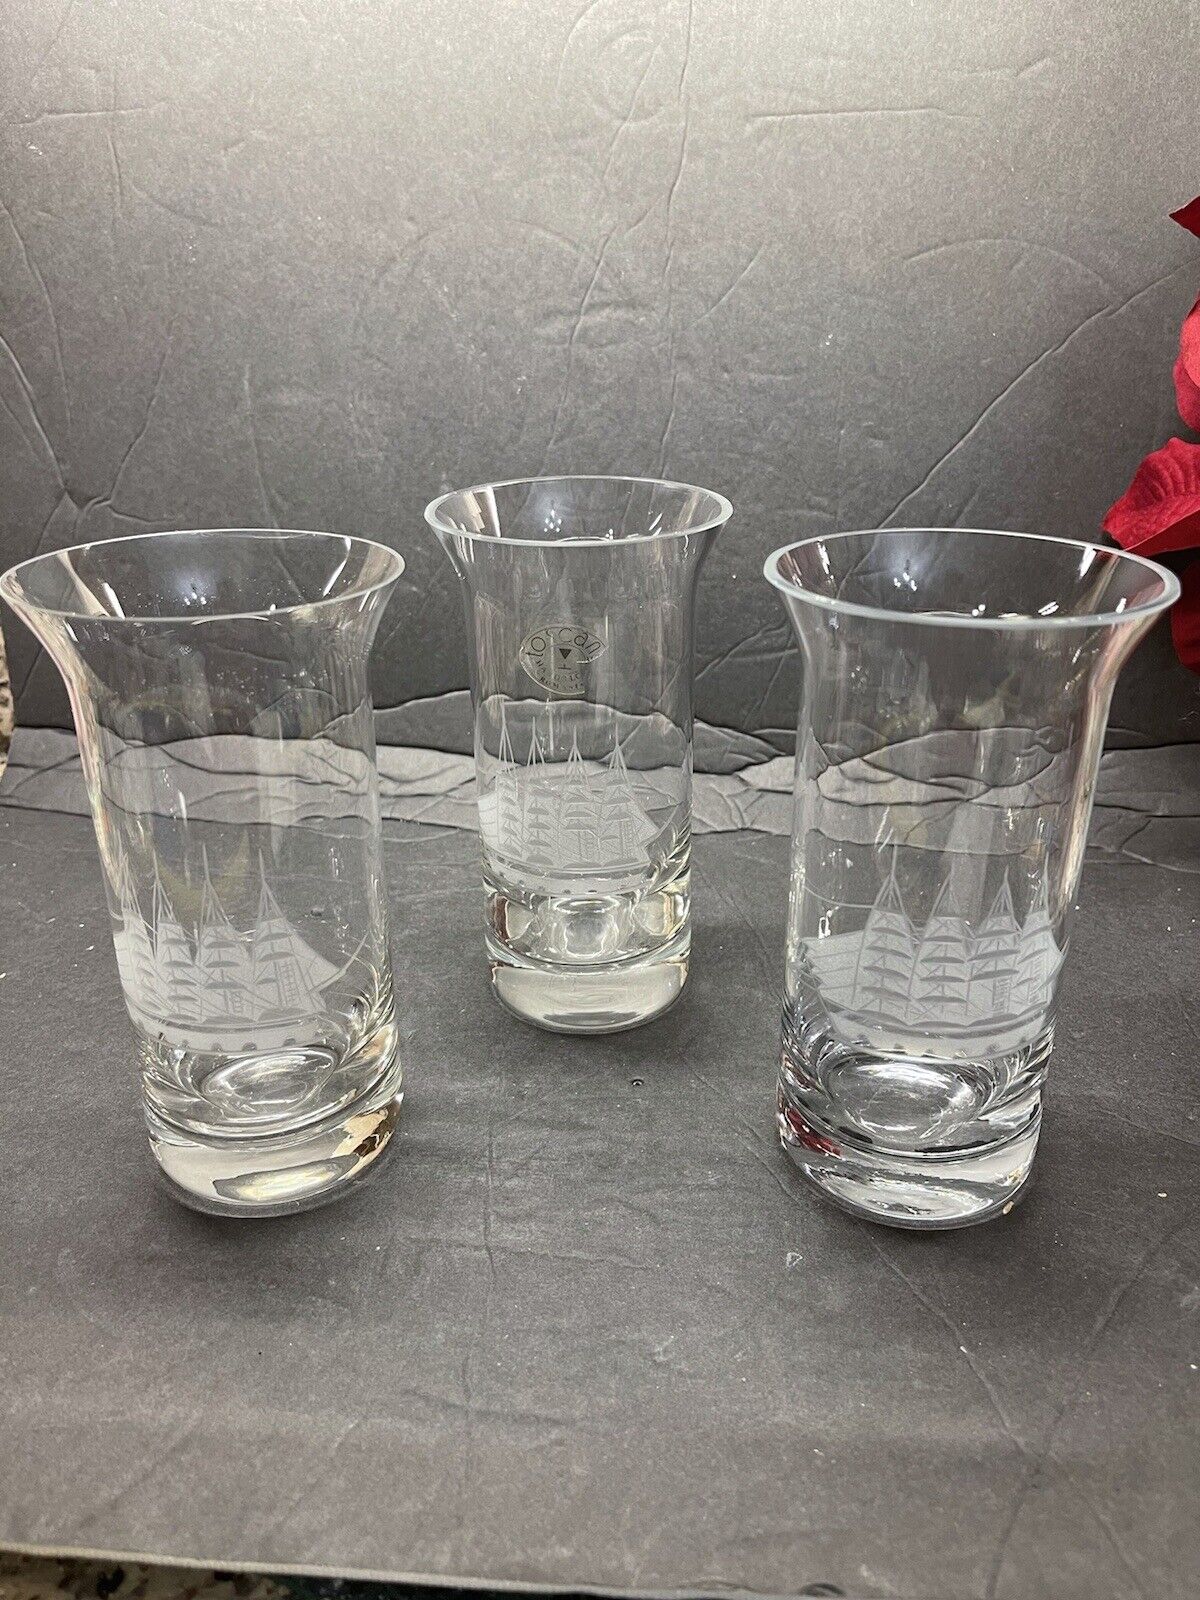 VTg TOSCANY Crystal ETCHED  SHIP SET- 3 HIGHBALL GLASSES Romania- Exc